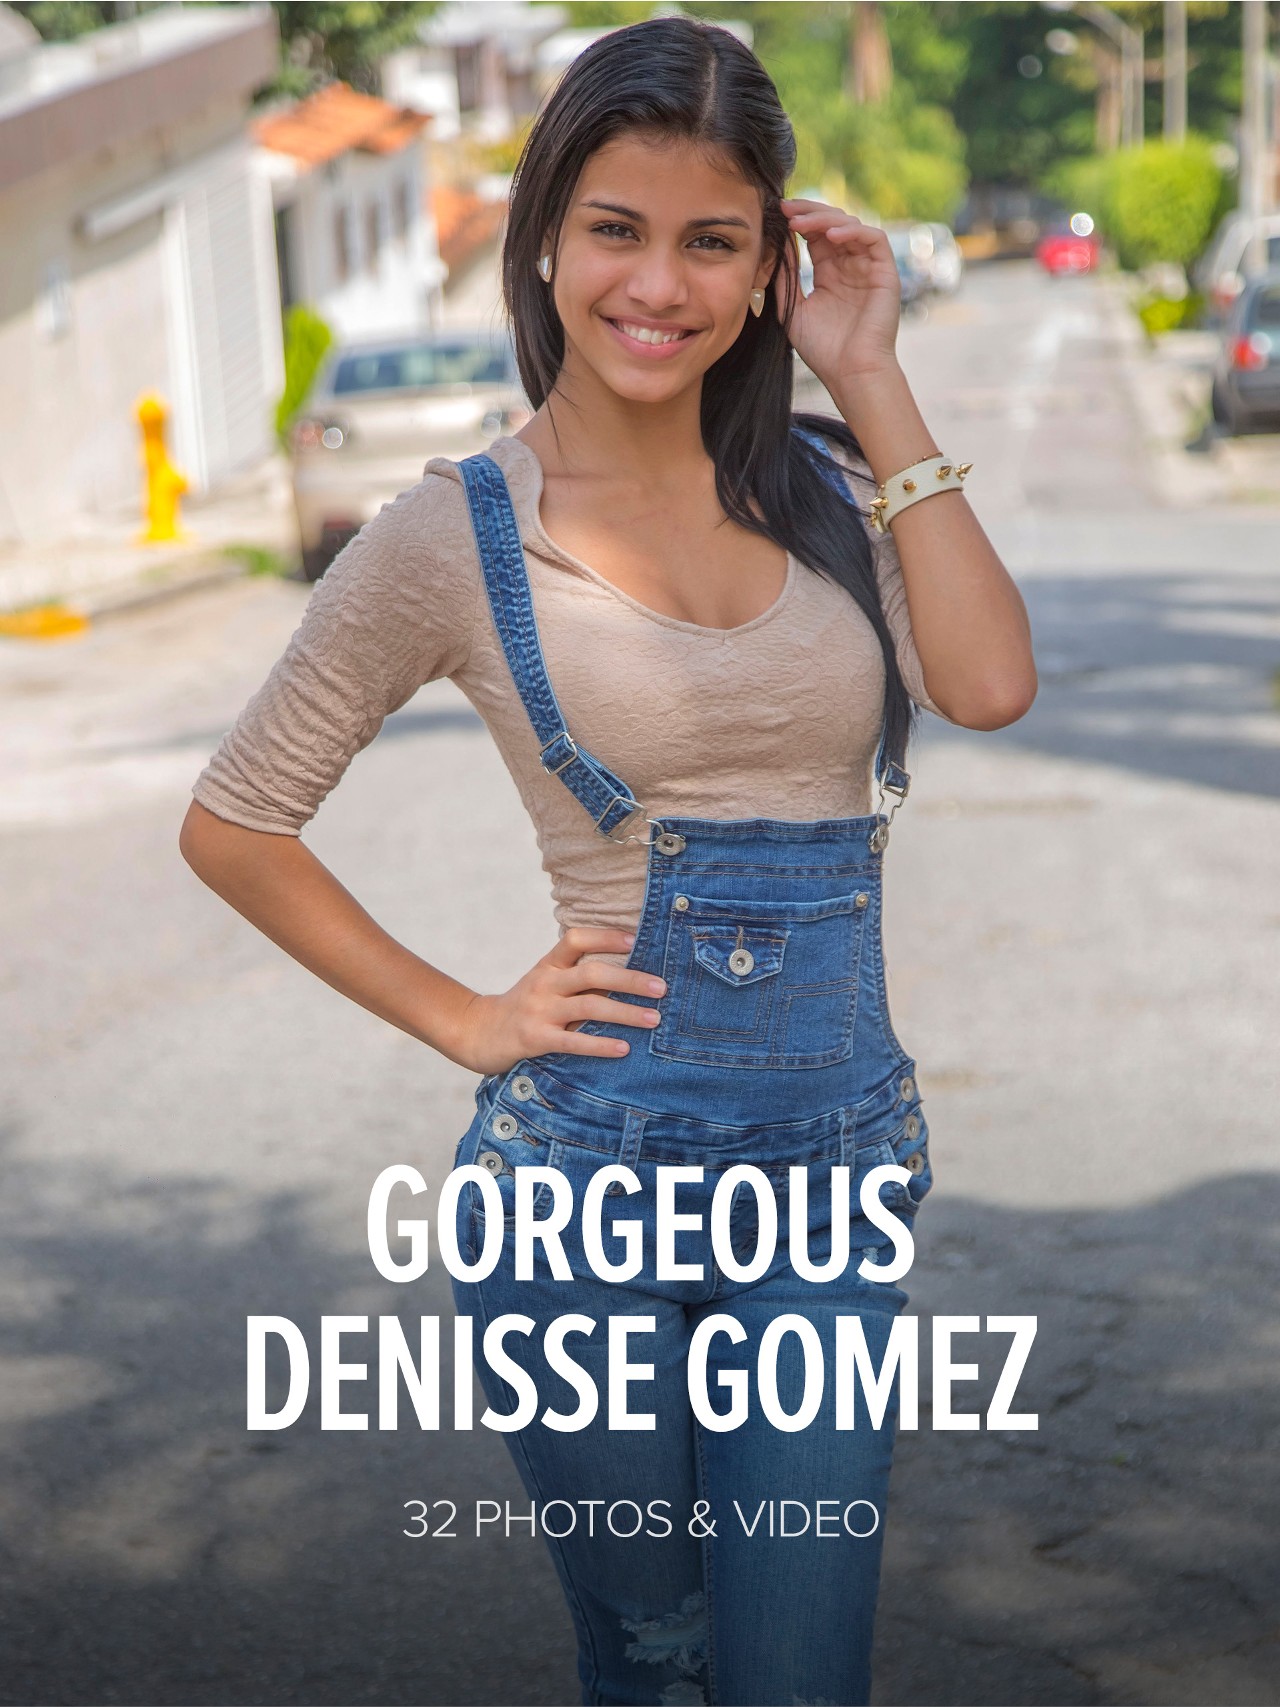 Our photographer in Venezuela discovered this gorgeous but shy girl in the streets od Caracas. Her name is Denisse Gomez, she